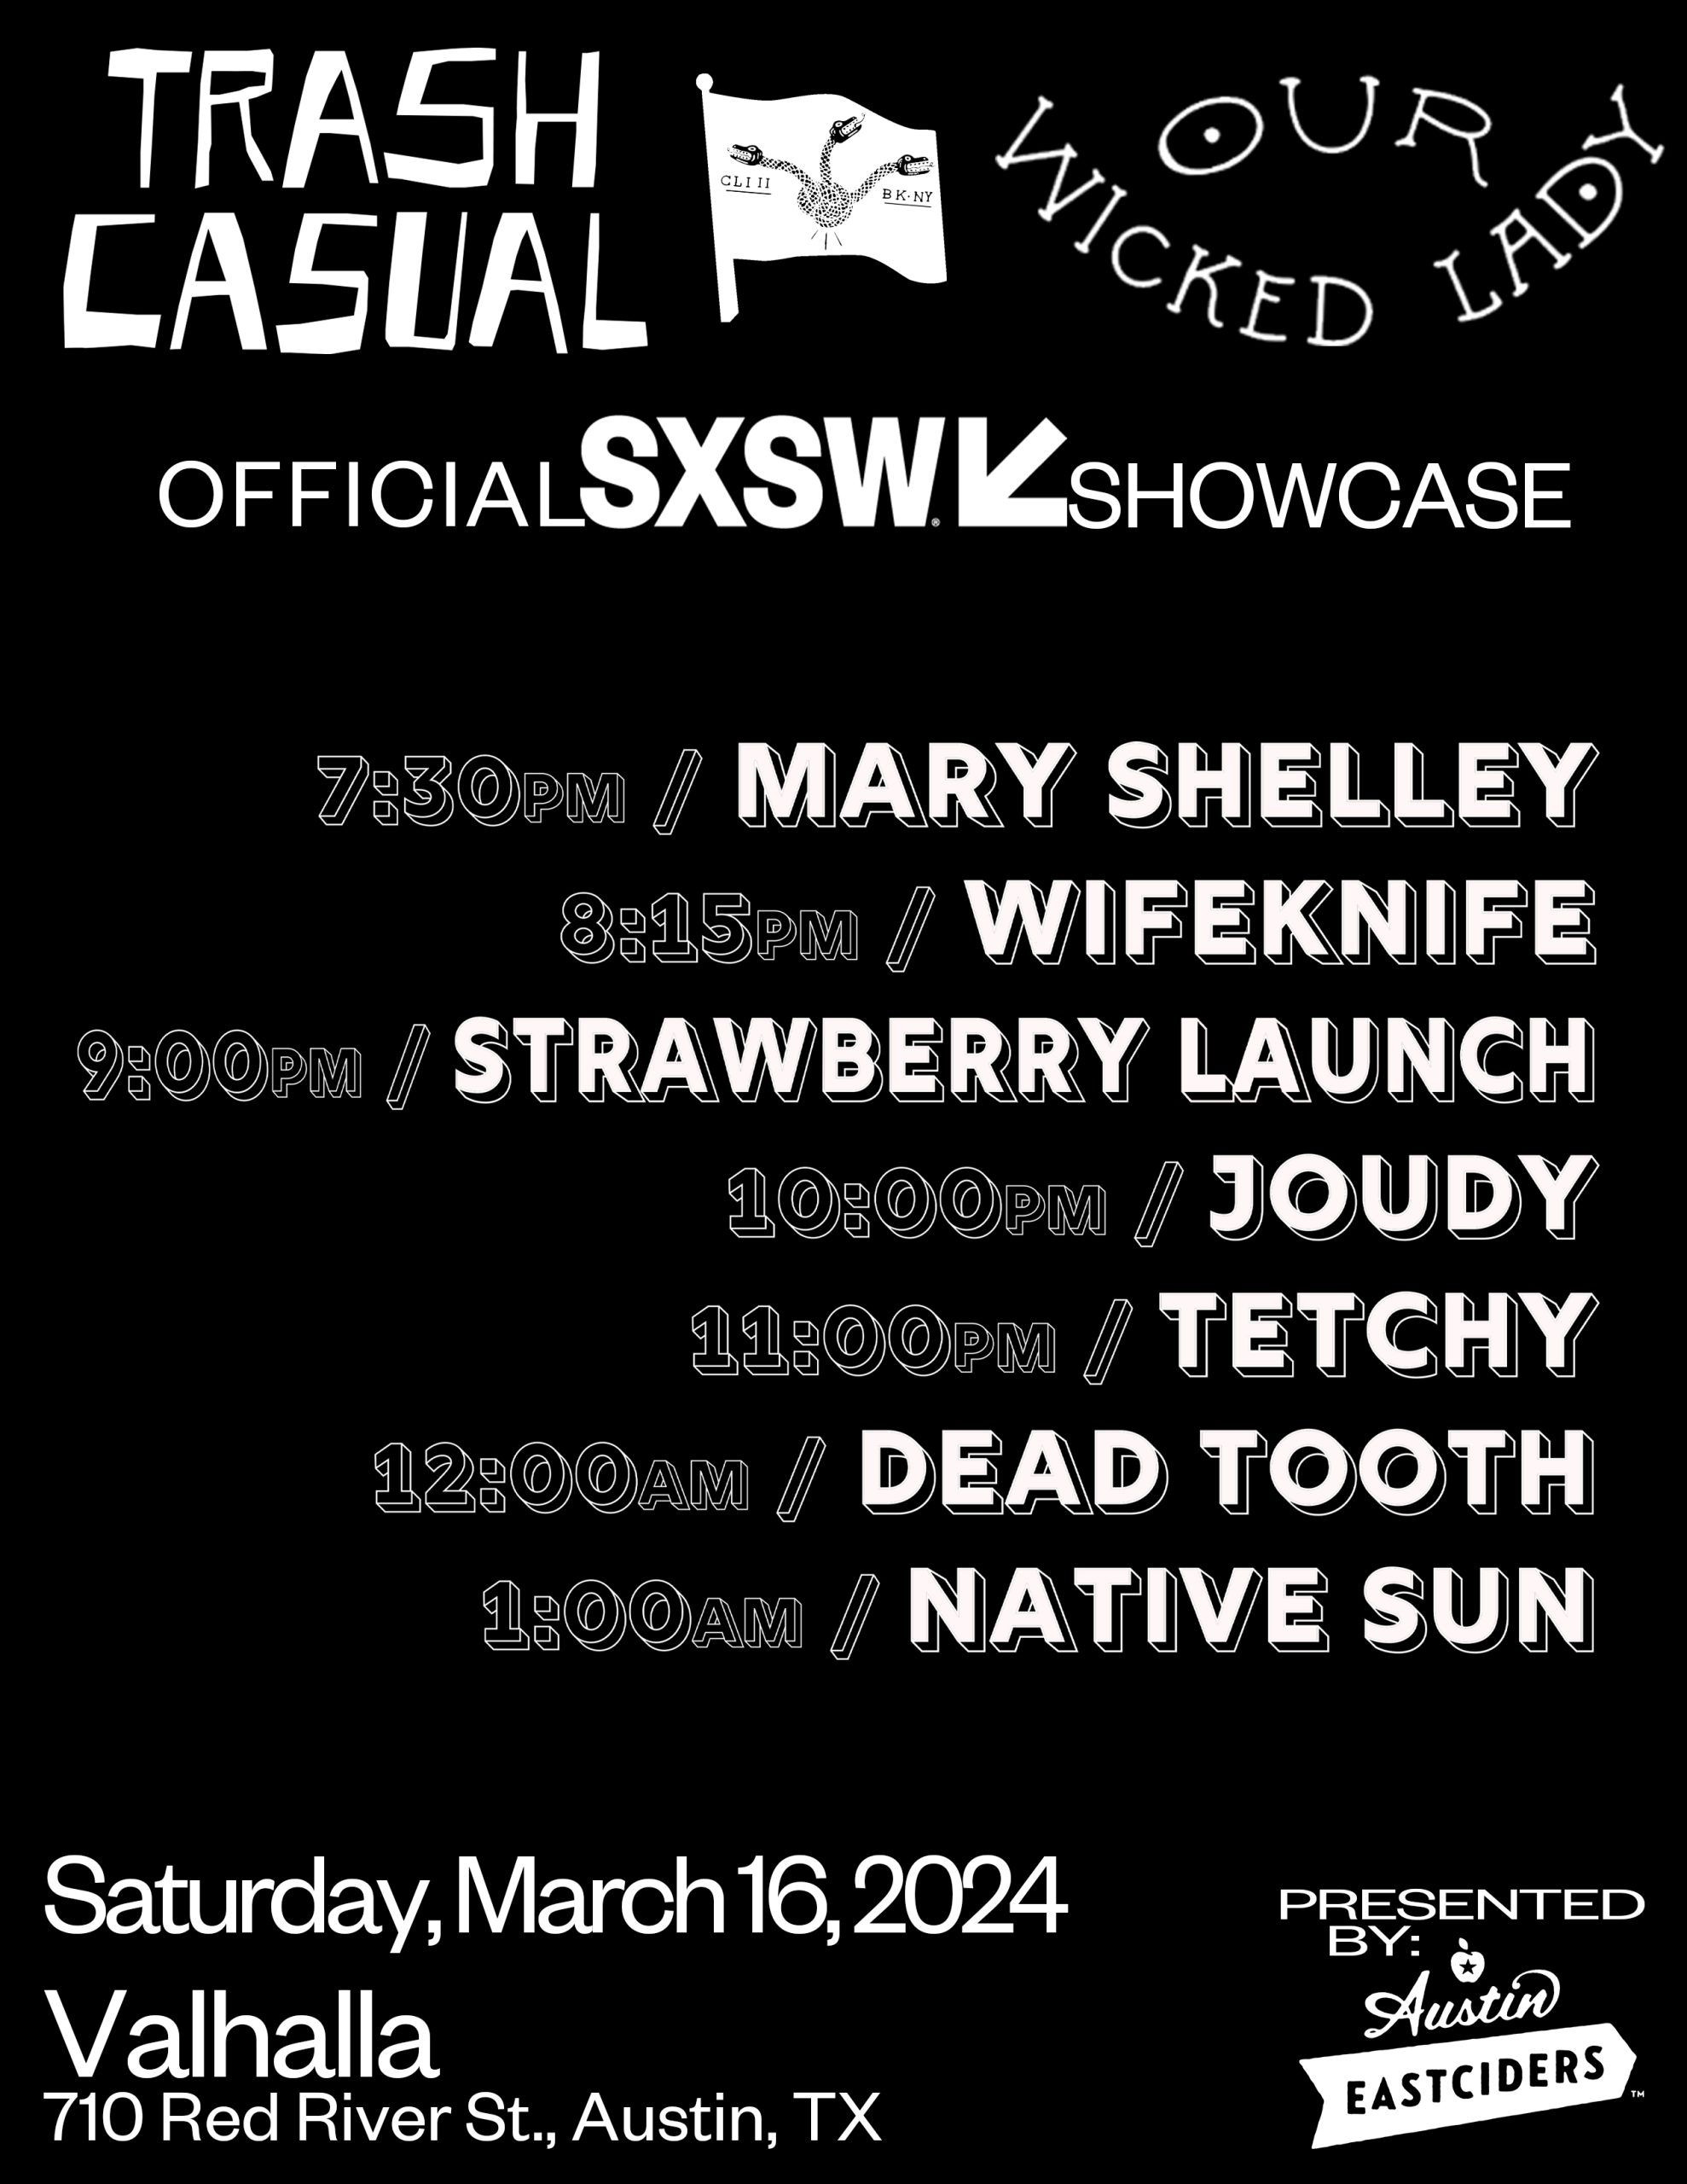 Trash Casual & Our Wicked Lady – SXSW 2024
